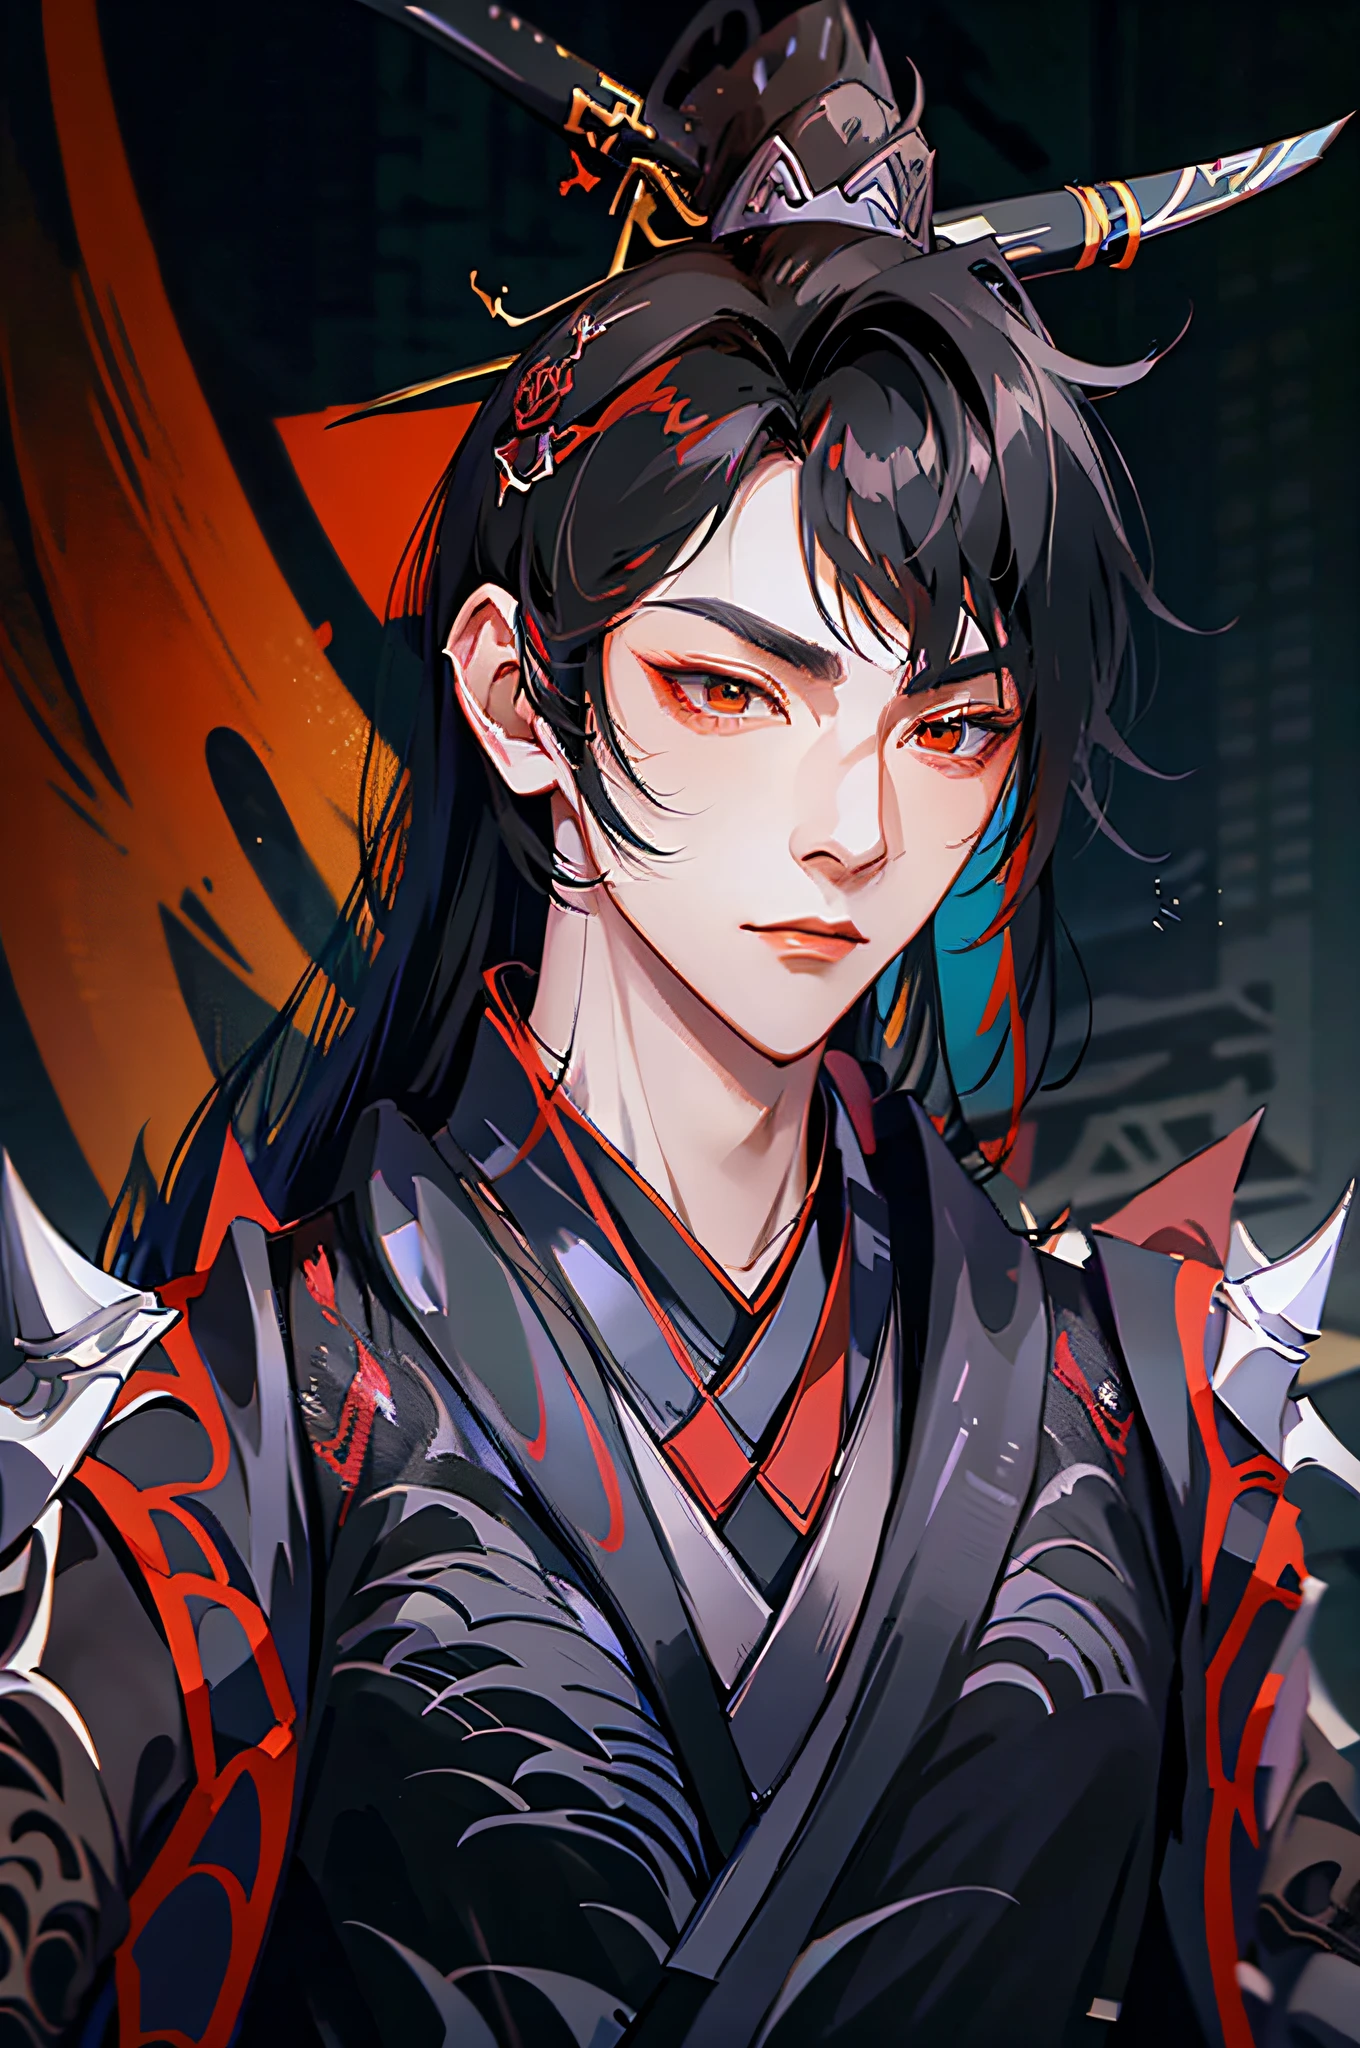 Anime - style image of a man with black hair and black and red outfit, red eyes, Keqing von Genshin Impact, Handsome guy in demon slayer art, Taisho Roman, handsome androgynous prince, Zhongli von Genshin Impact, black haired deity, anime gutaussehender mann, zarter androgyner Prinz, Masamune Shiro, heise jinyao, Offizielle Kunst